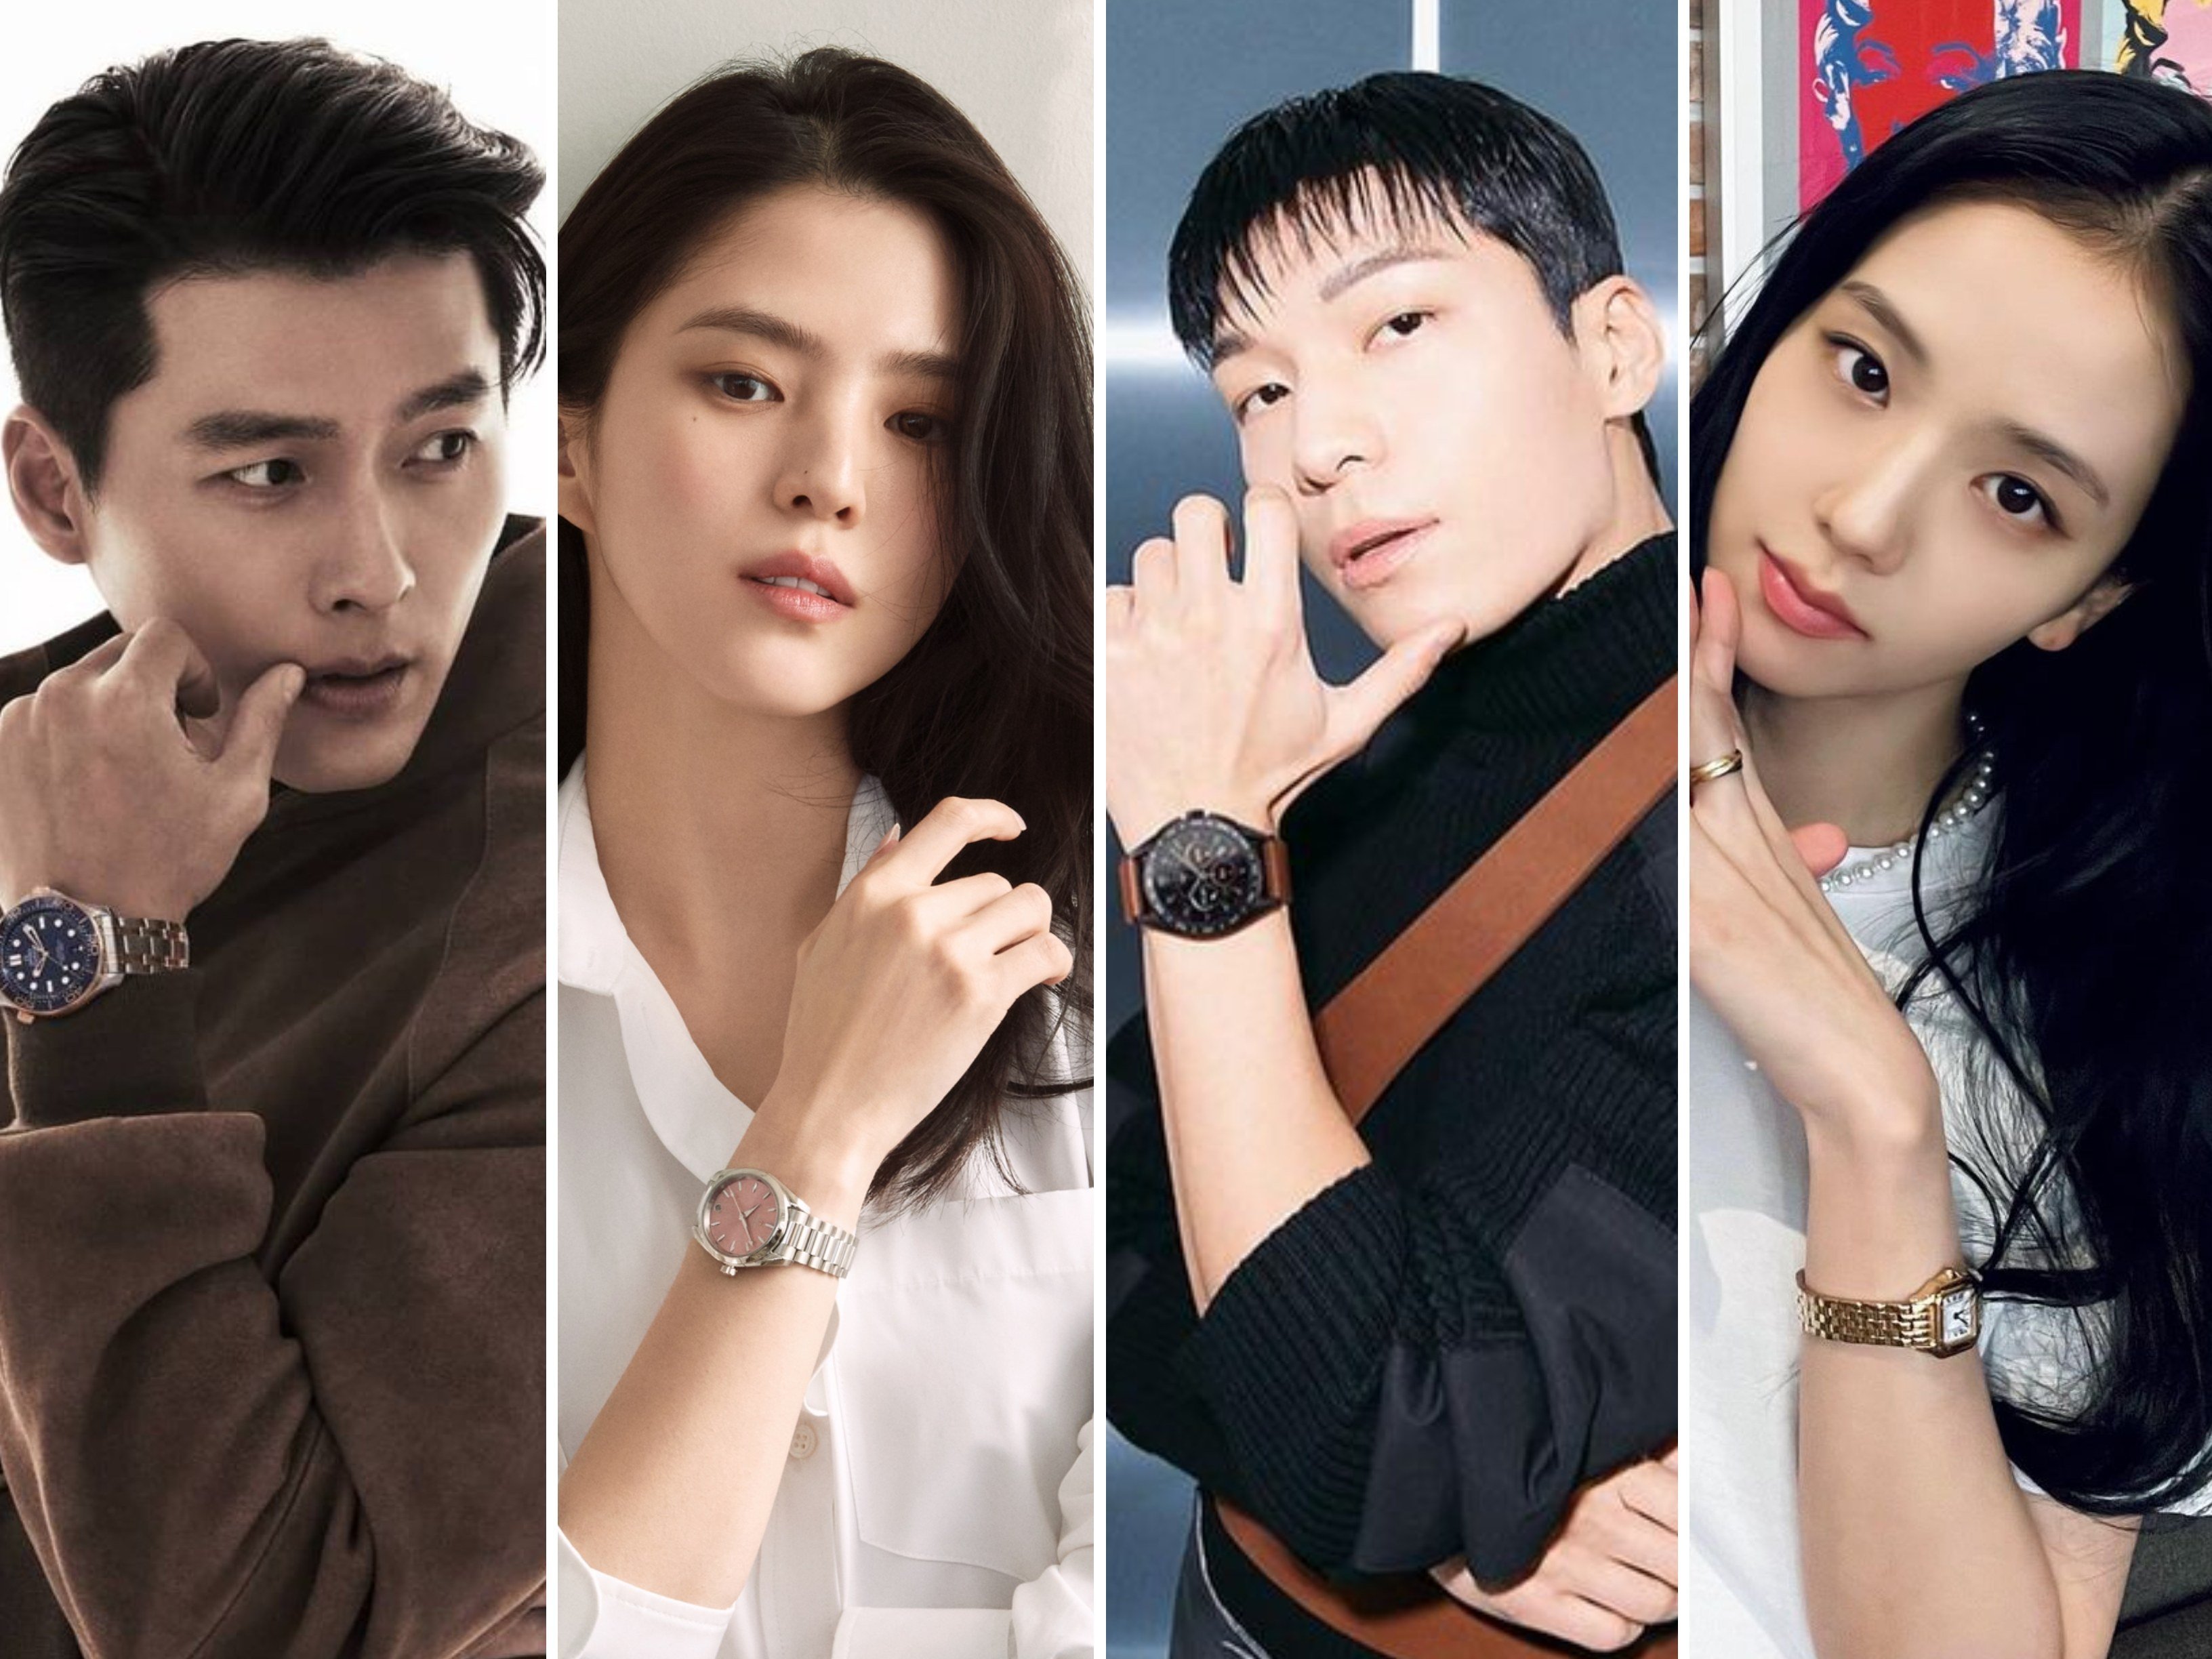 Hyun Bin, Han So-hee, Wi Ha-joon and Jisoo are all big names in K-pop and K-drama – and they all endorse luxury watch brands as a result. Photos: @vast.ent/Instagram; Omega; @wi__wi__wi, @sooyaaa__/Instagram